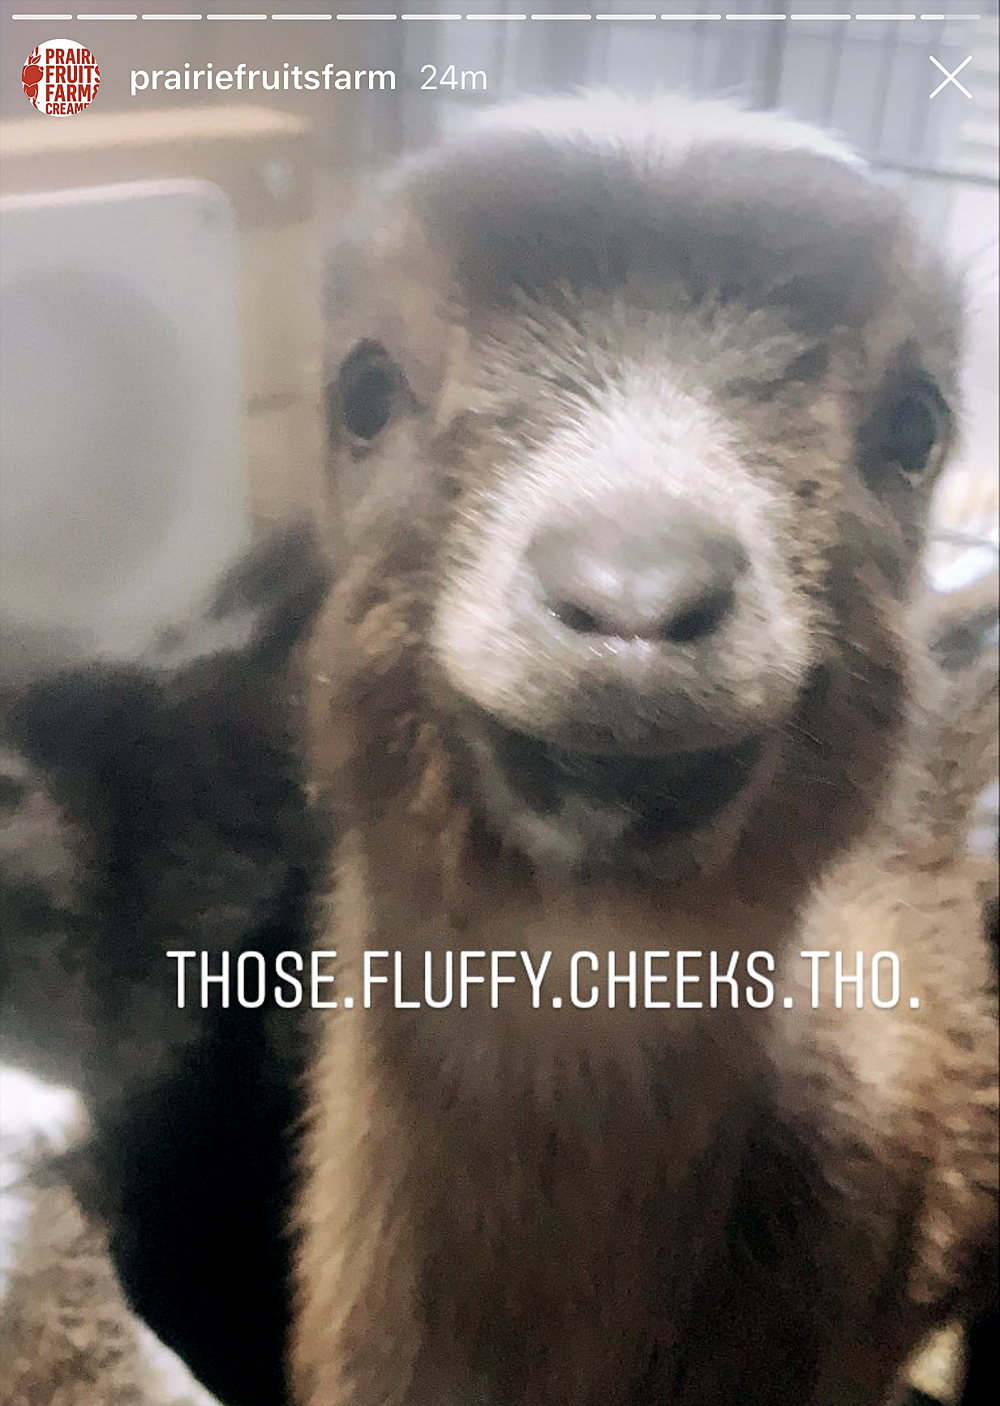 Screenshot from Prairie Fruits Farm Instagram stories. A baby goat looks into the camera. It appears to be smiling. White text on the screen reads 